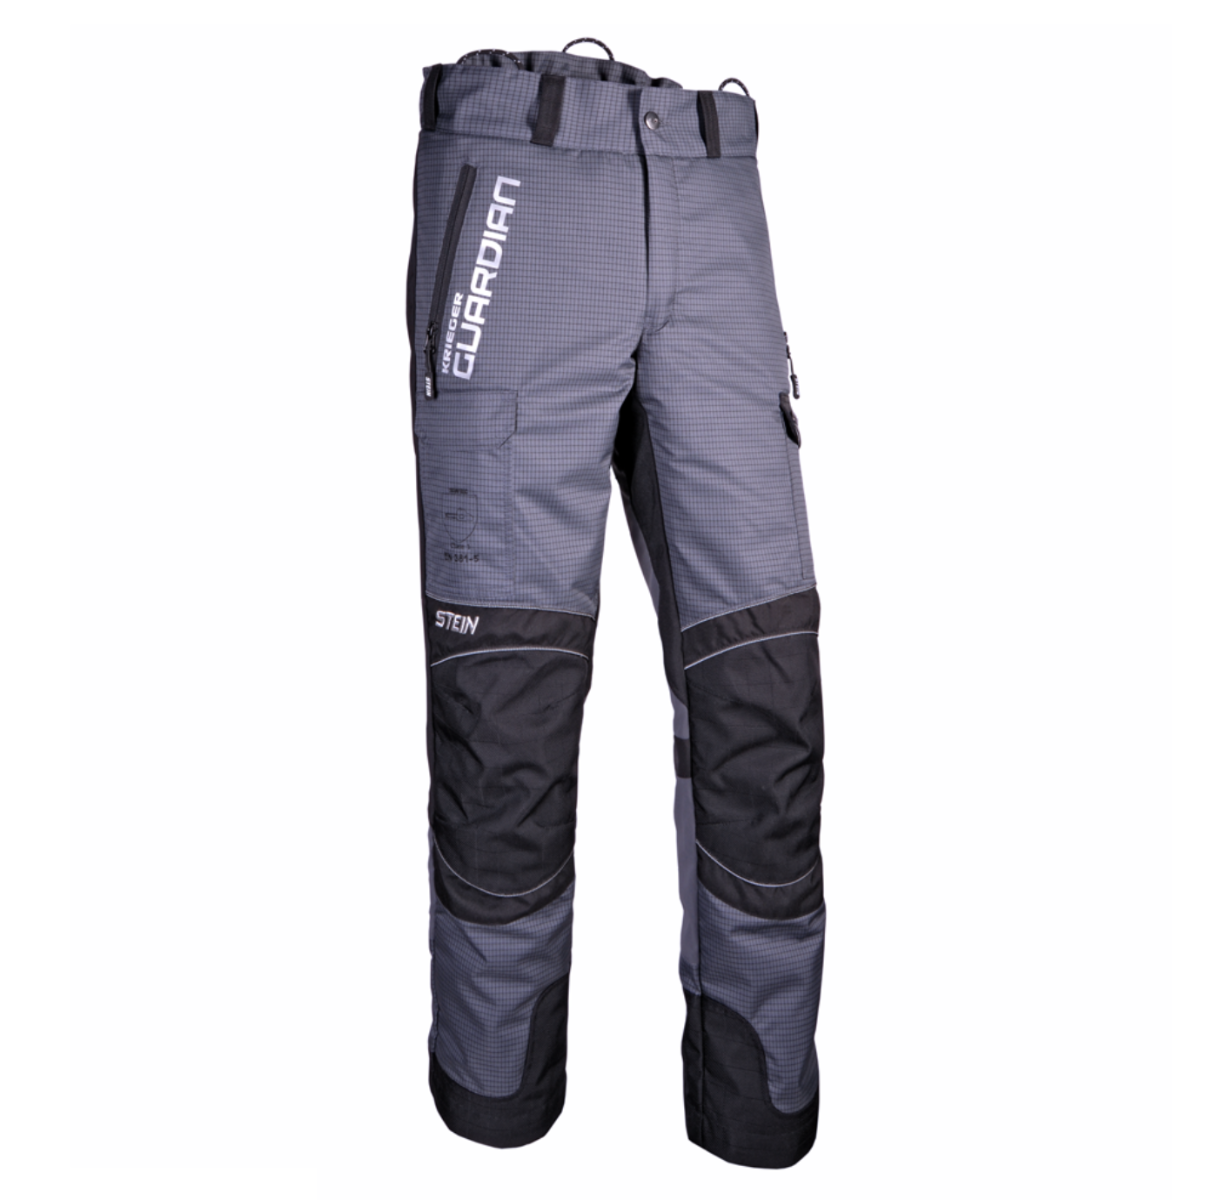 STEIN KRIEGER GUARDIAN Design A Protective Chainsaw Trousers